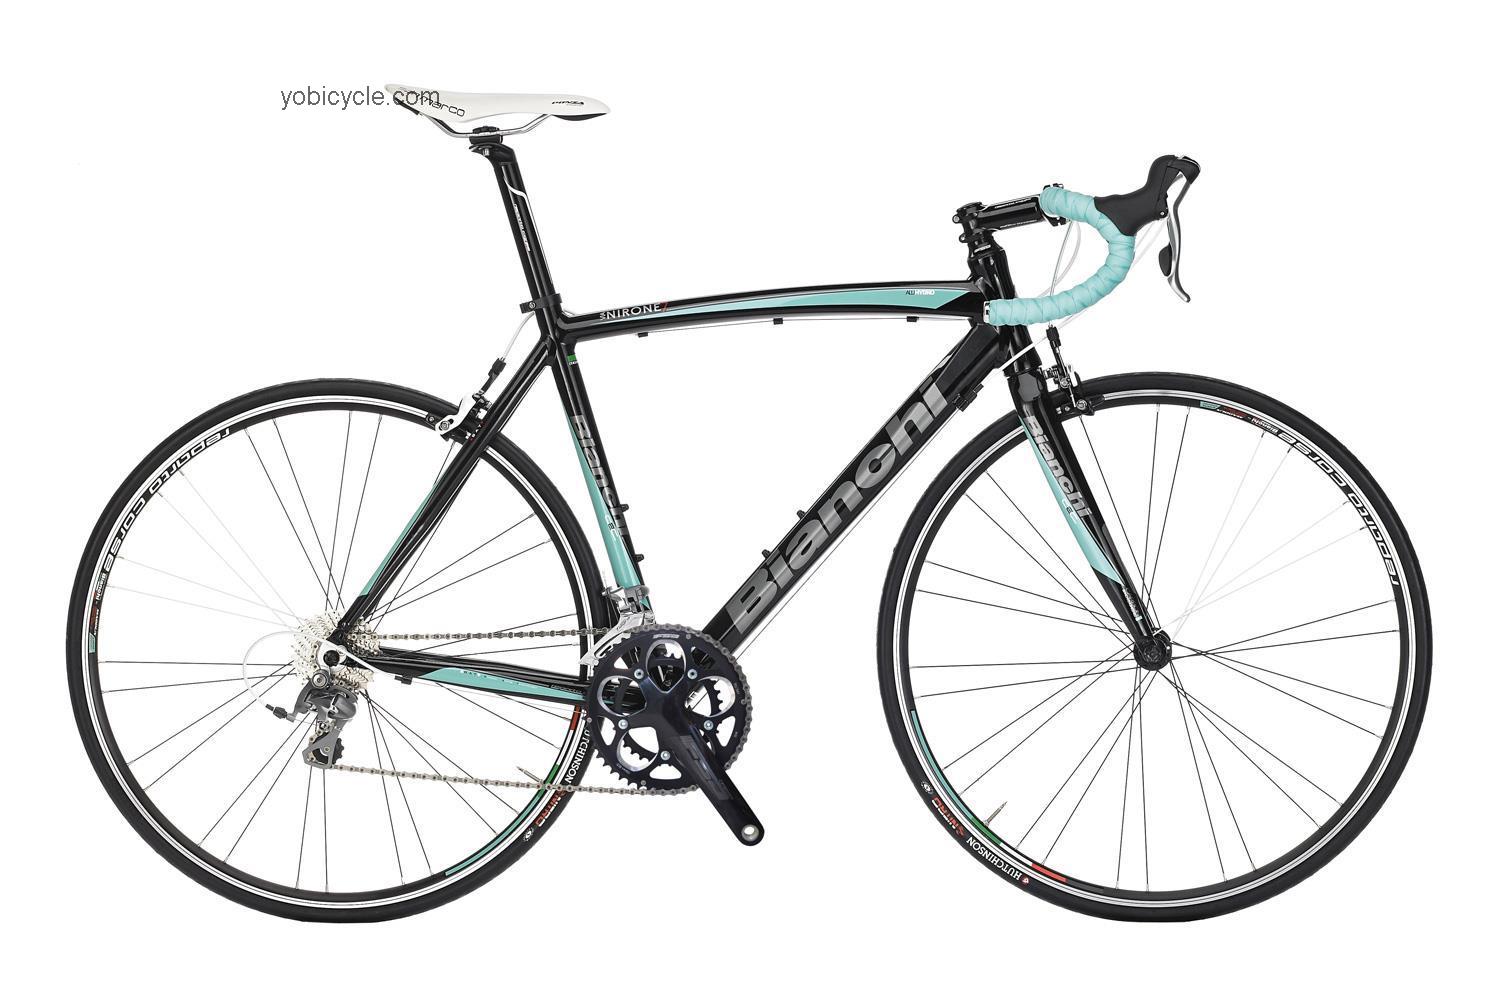 Bianchi  Via Nirone 7 Tiagra Technical data and specifications